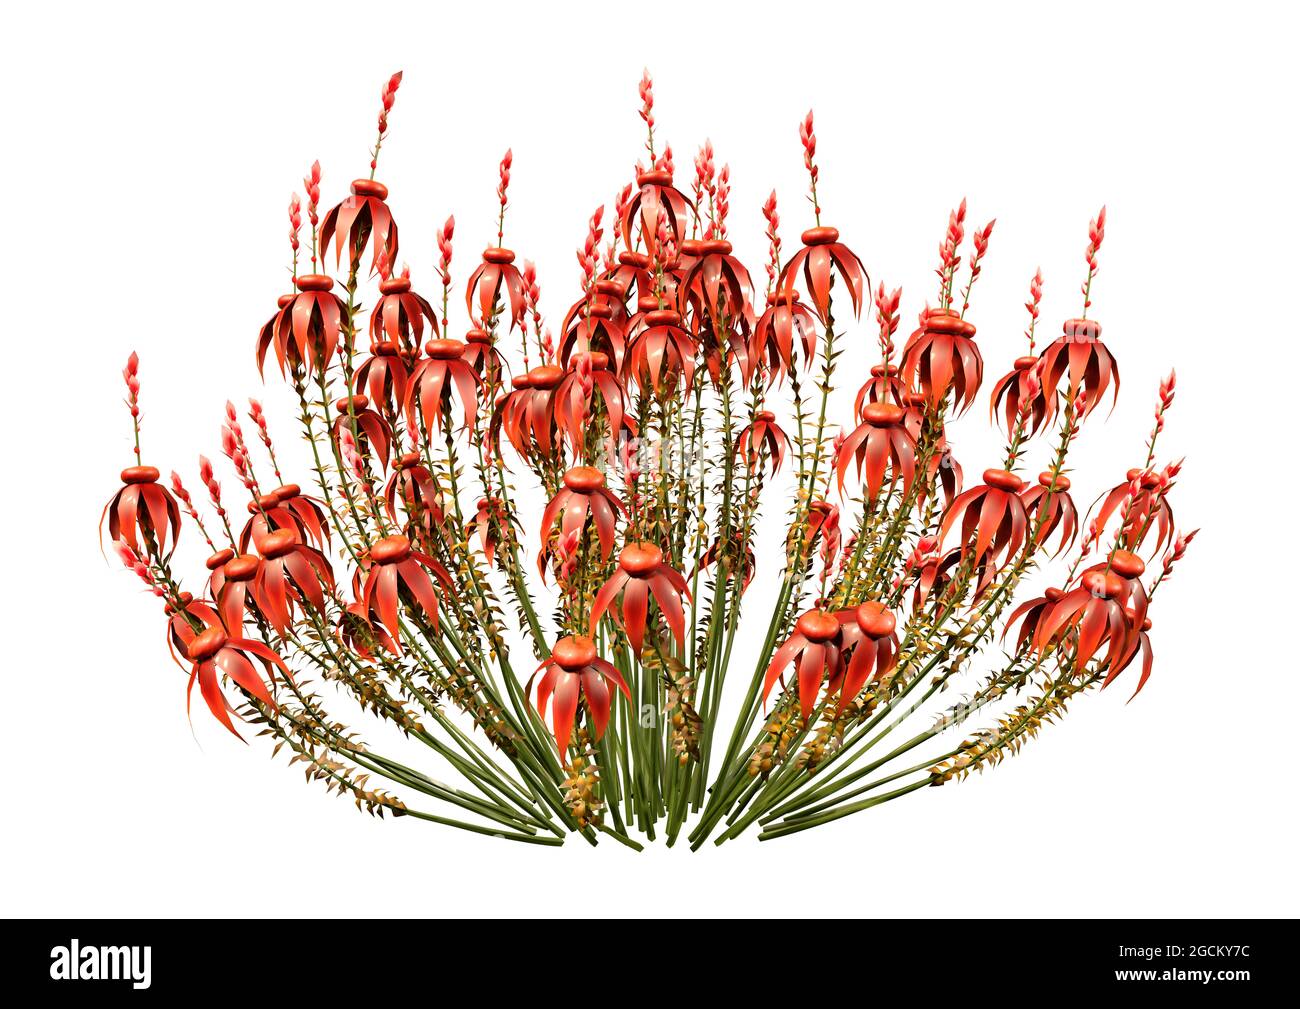 3D rendering of red calluna vulgaris flowers isolated on white background Stock Photo